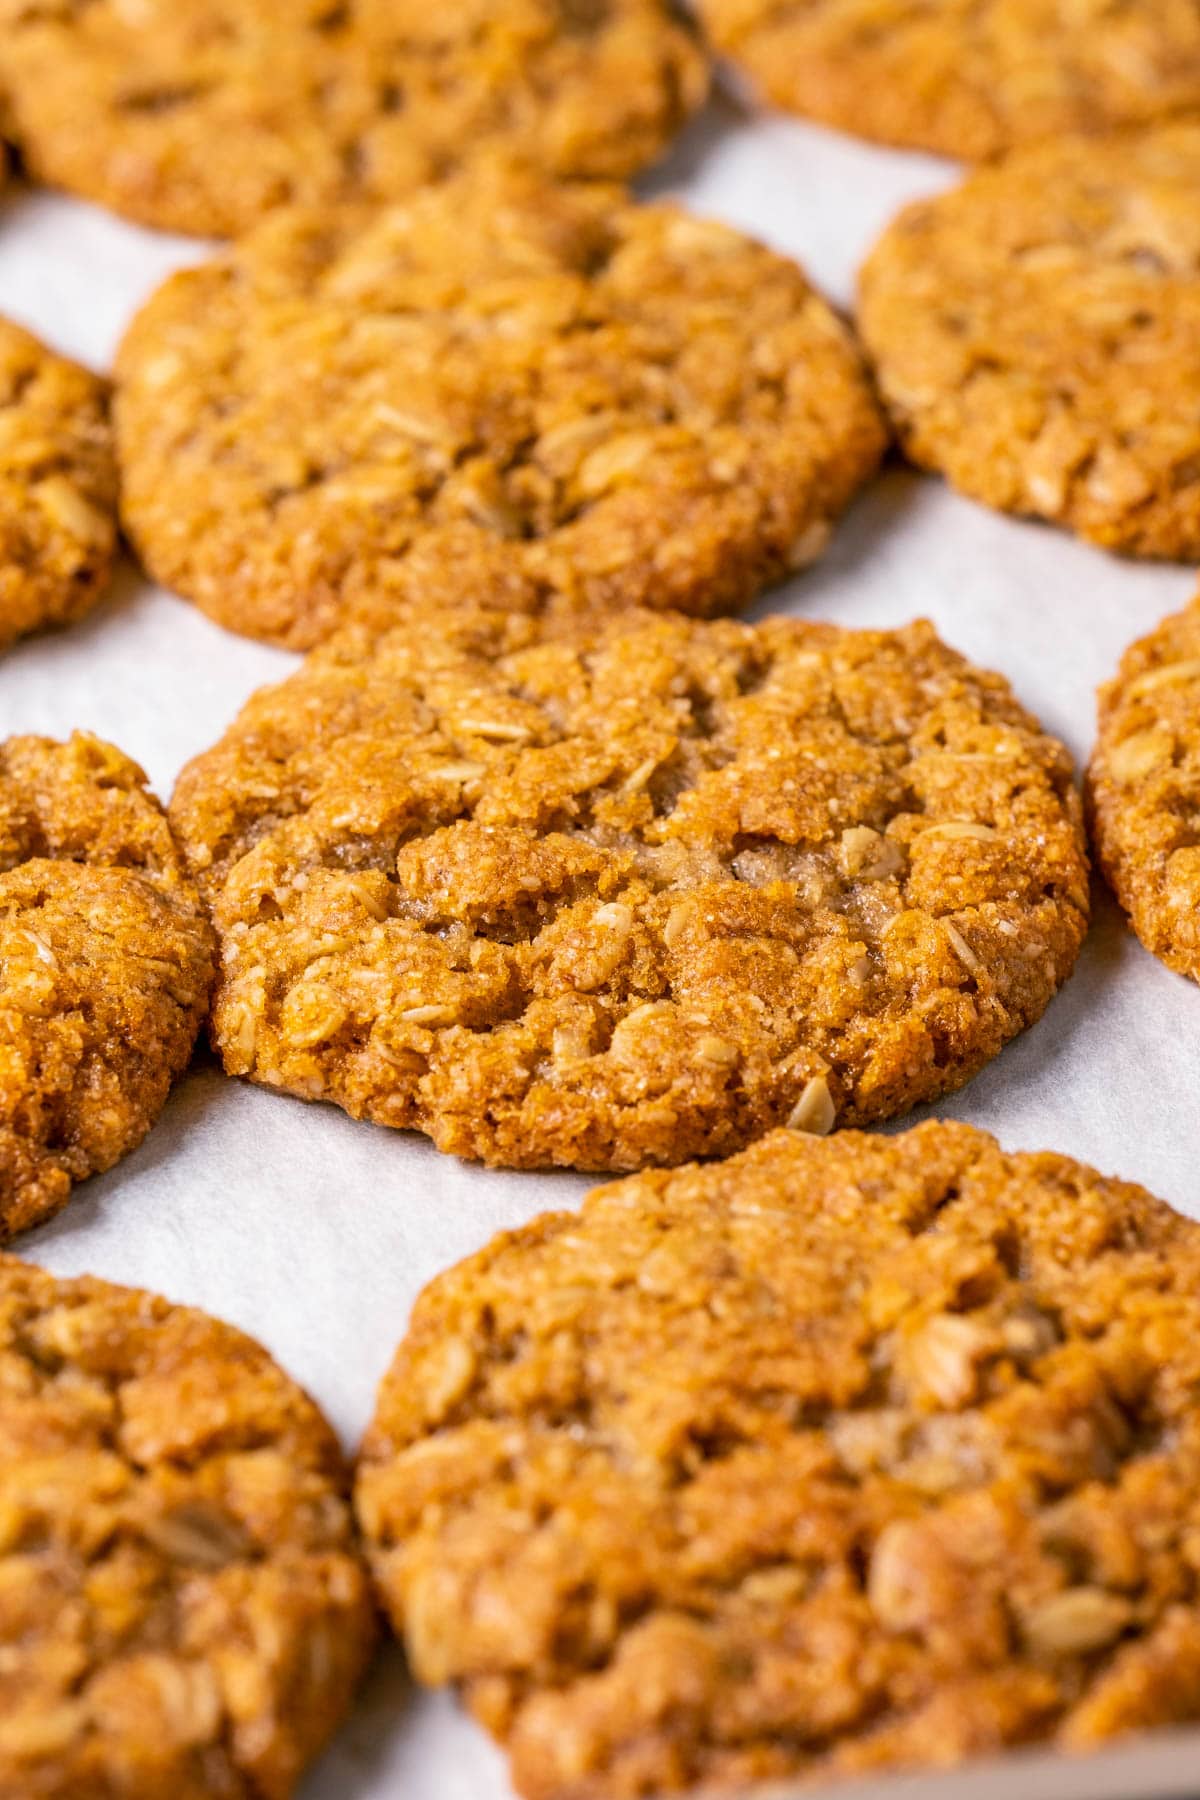 Vegan oatmeal cookies on a parchment lined baking tray.